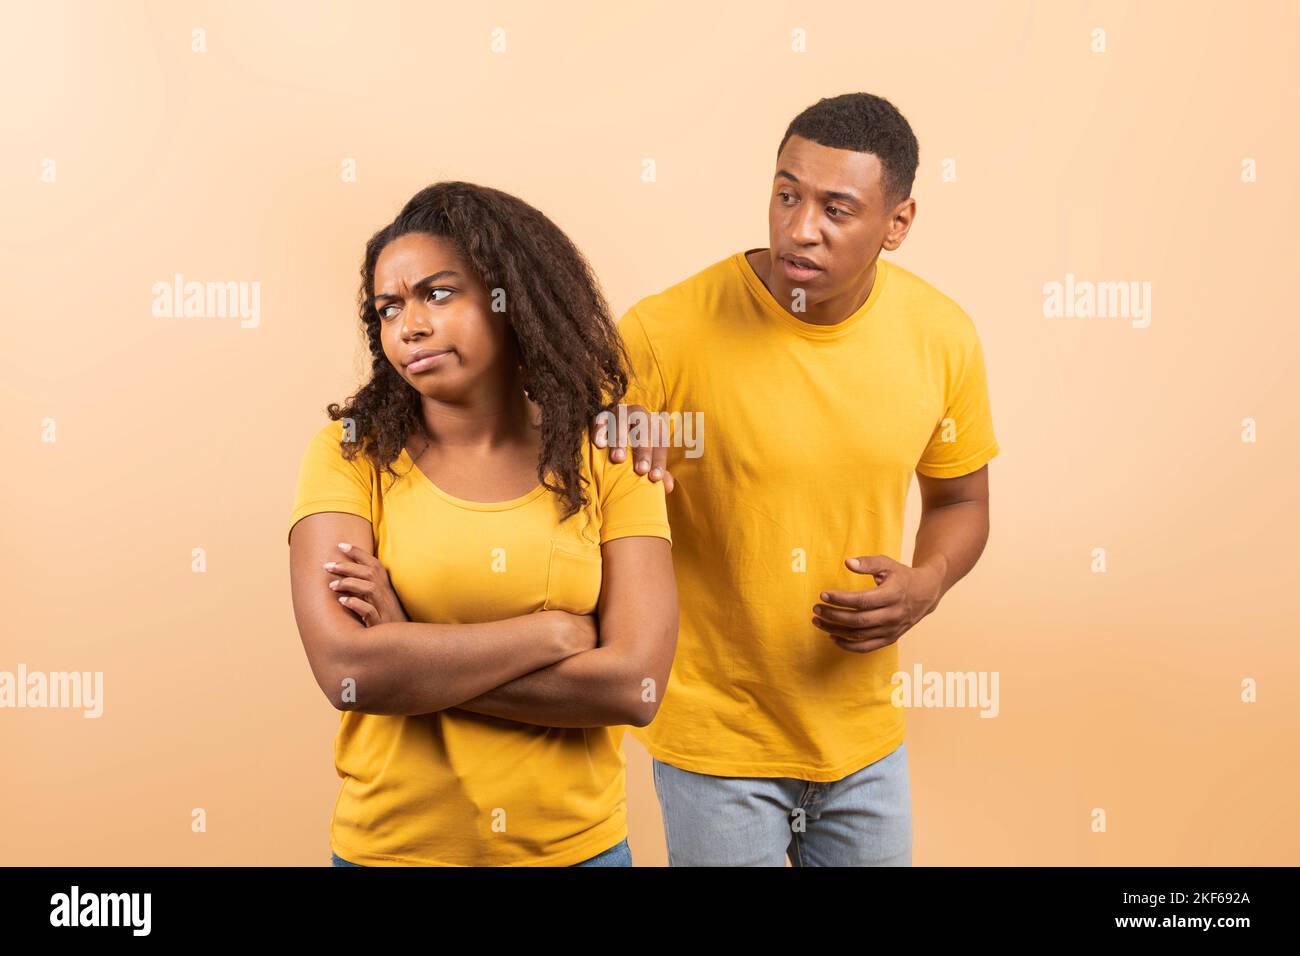 Black couple after quarrel, husband trying to talk and reconcile with offended wife, standing over peach background Stock Photo